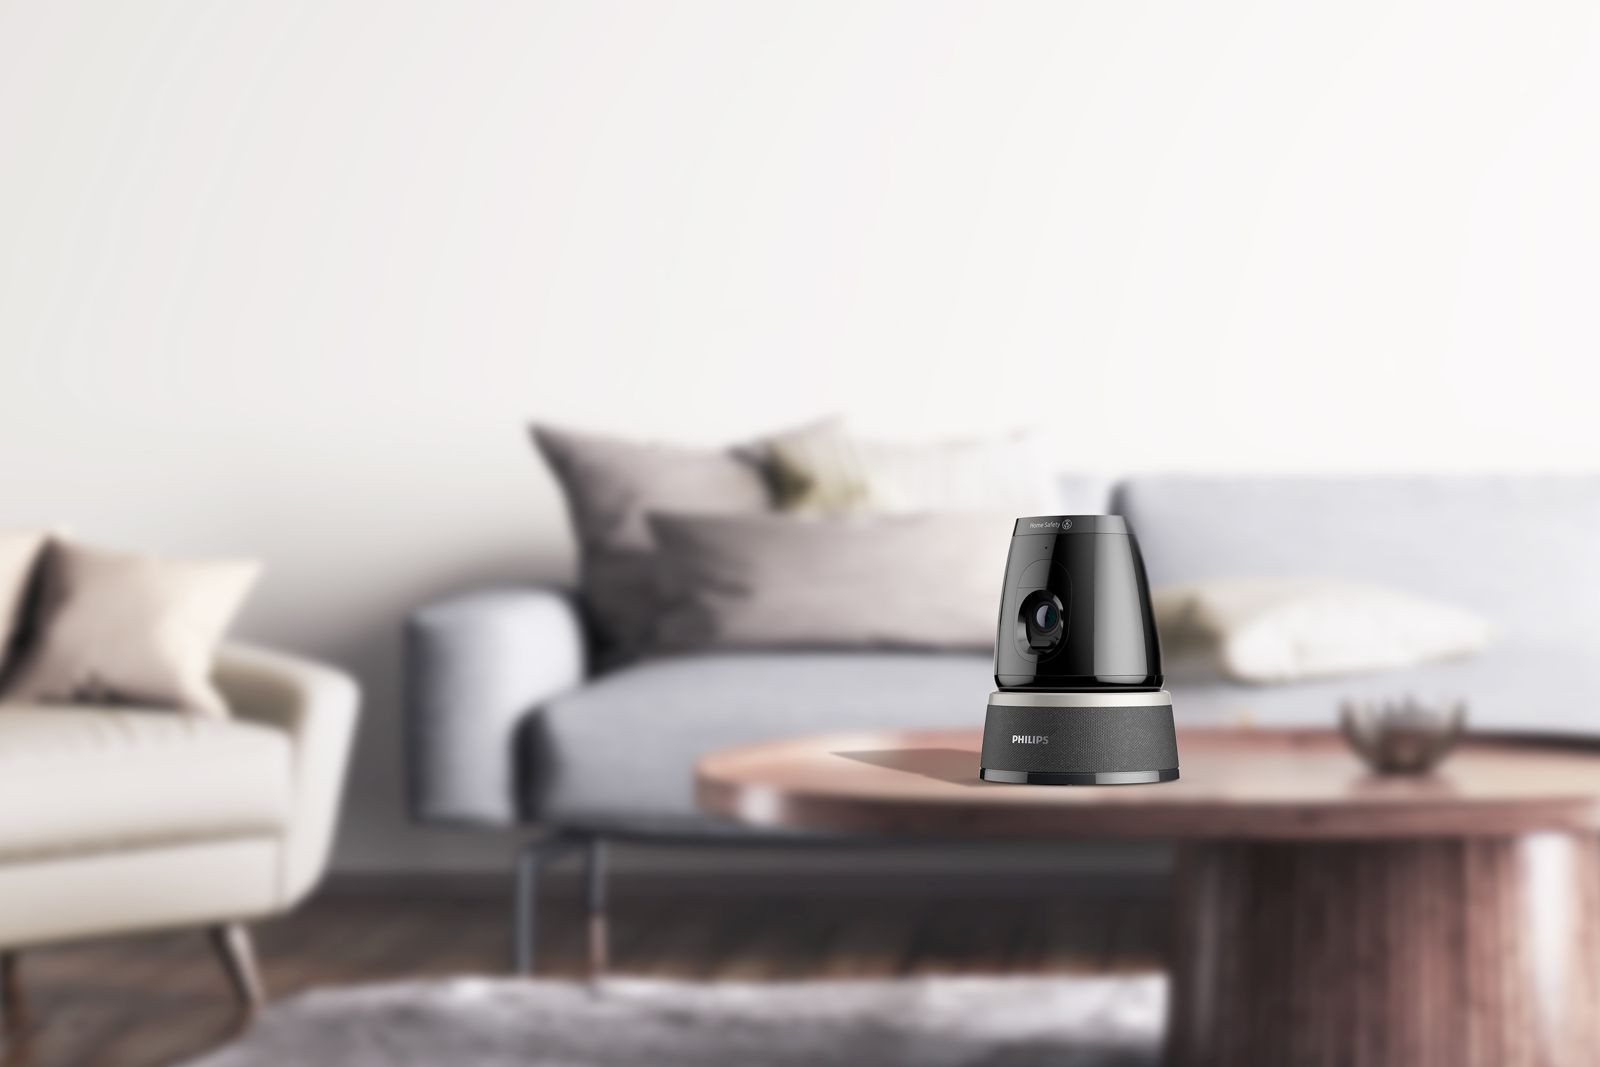 Versuni Makes an Innovative Leap in the Home Safety Space With the Launch of the Philips 5000 Series Indoor 360° Camera